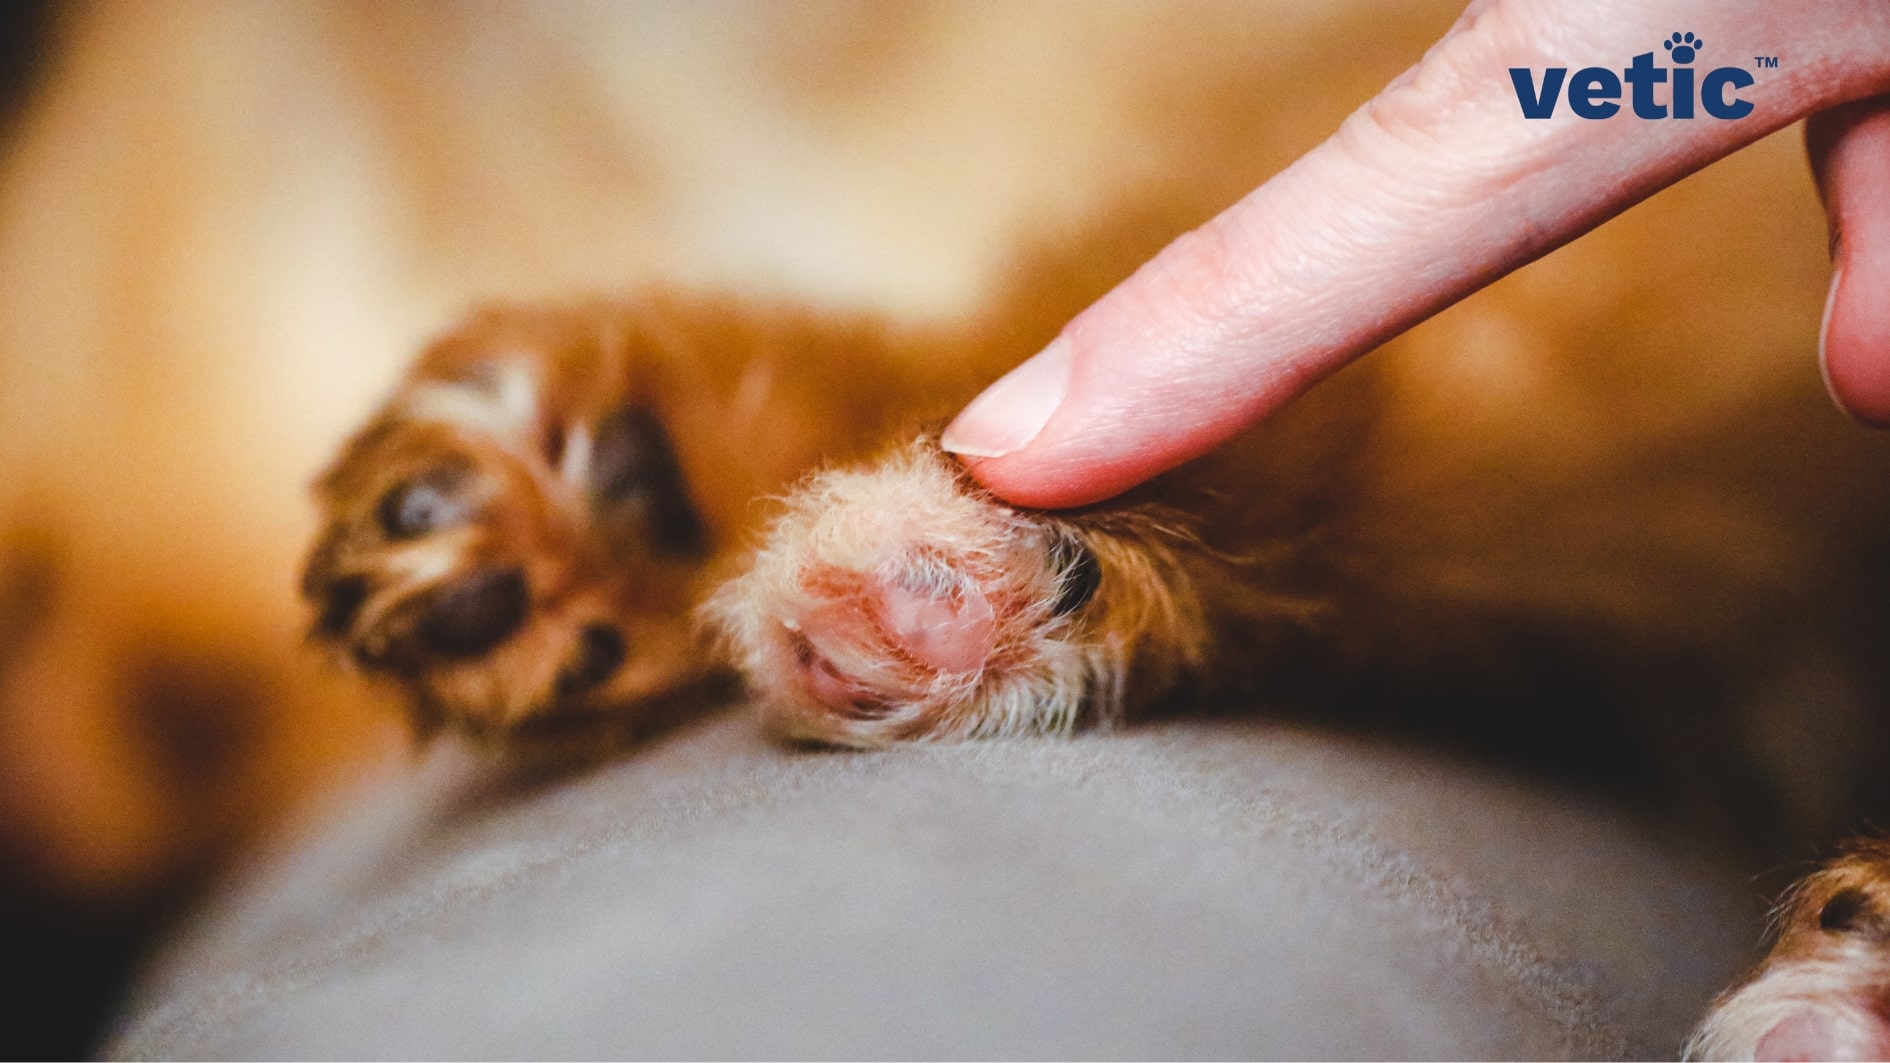 Single finger touching a bald, pink and inflamed spot on the paw of a dog of unknown breed. Inflammation and tenderness can cause excess foot licking in dogs.